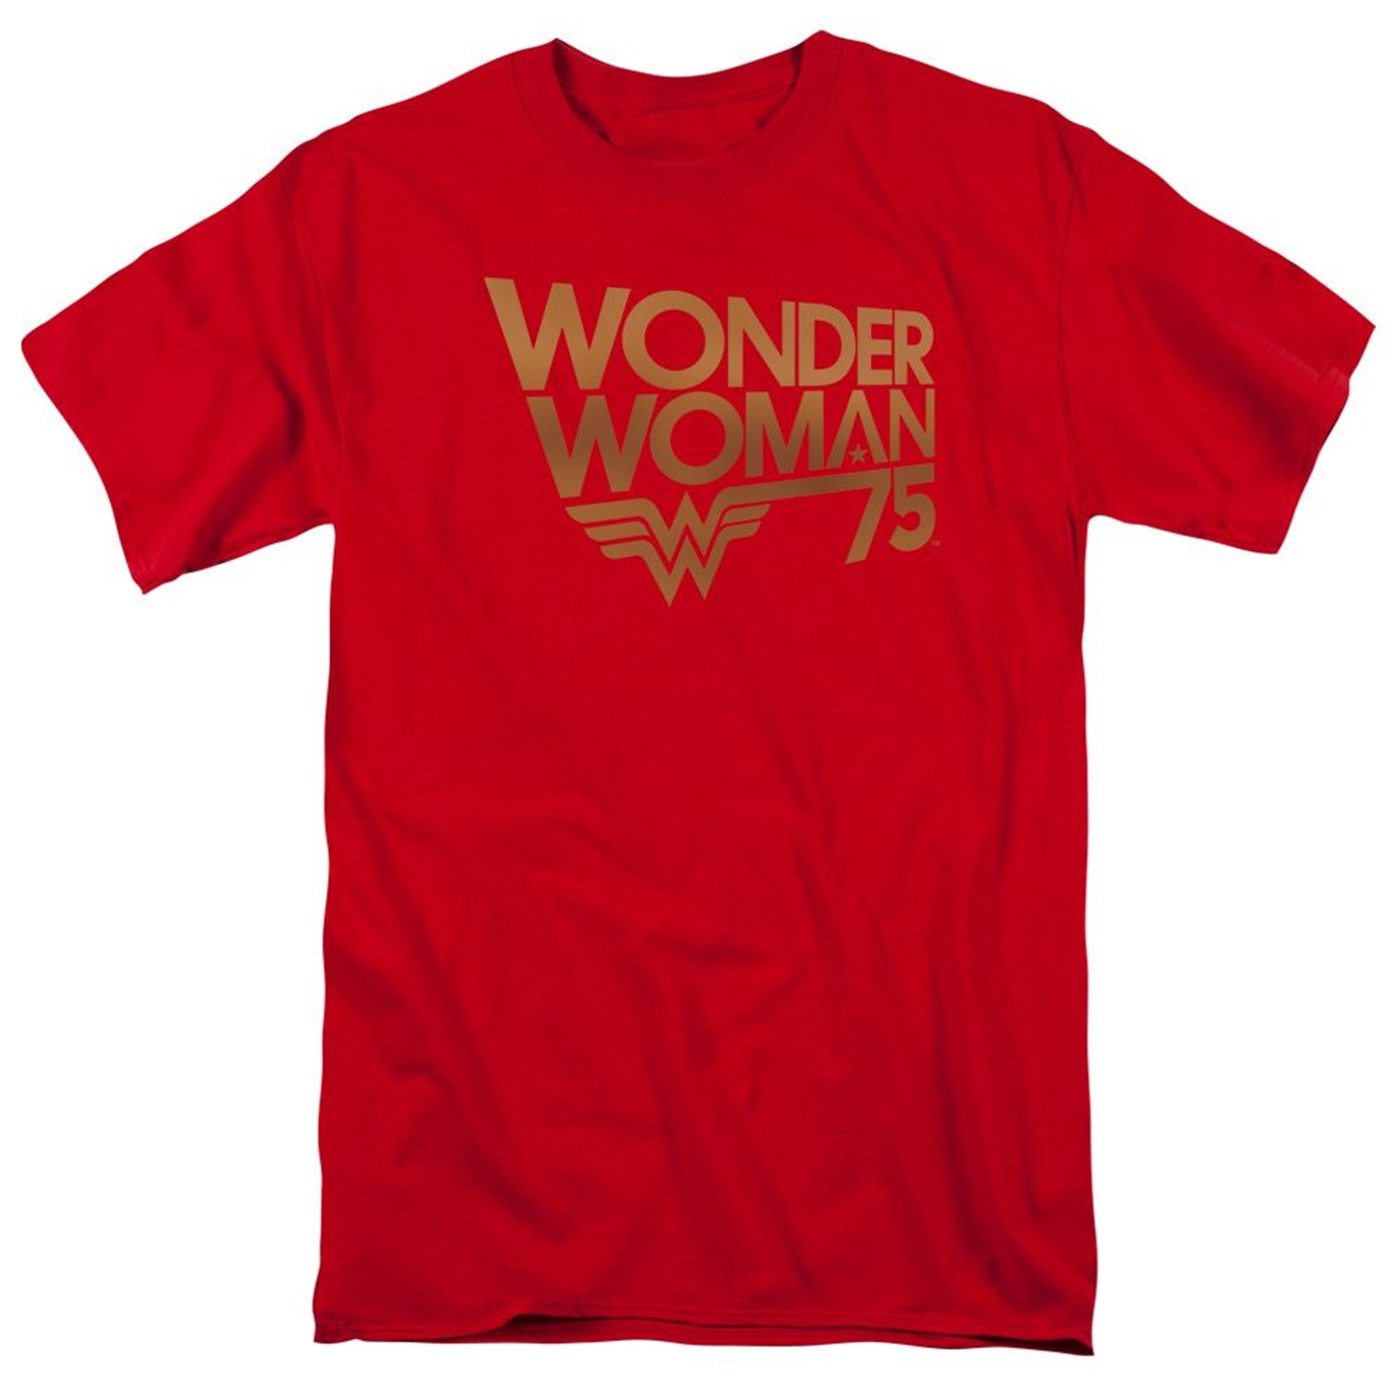 Wonder Woman 75 Red and Gold T-Shirt